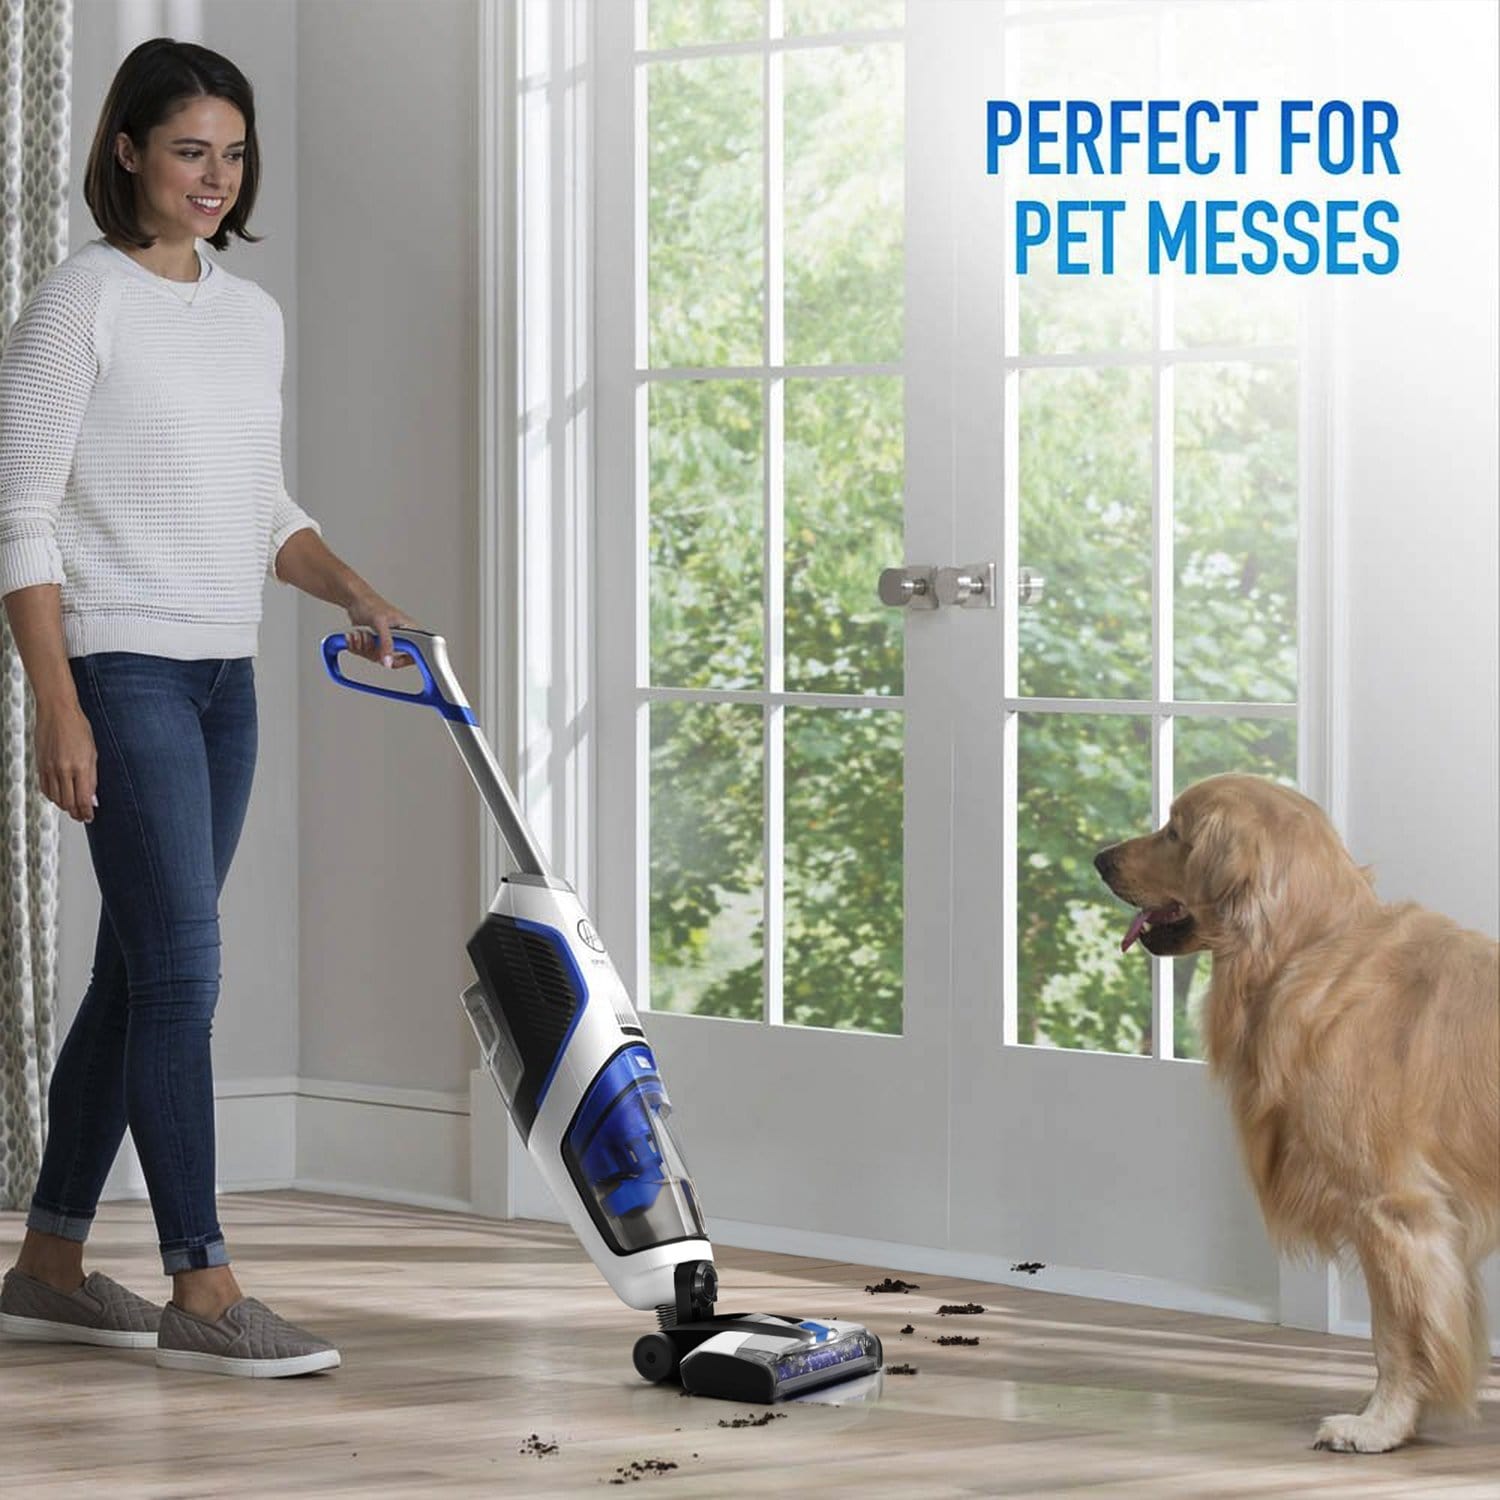 Hoover ONEPWR Floormate Jet Cordless Vacuum Cleaner with 1 Additional Free Rechargeable Lithium Battery